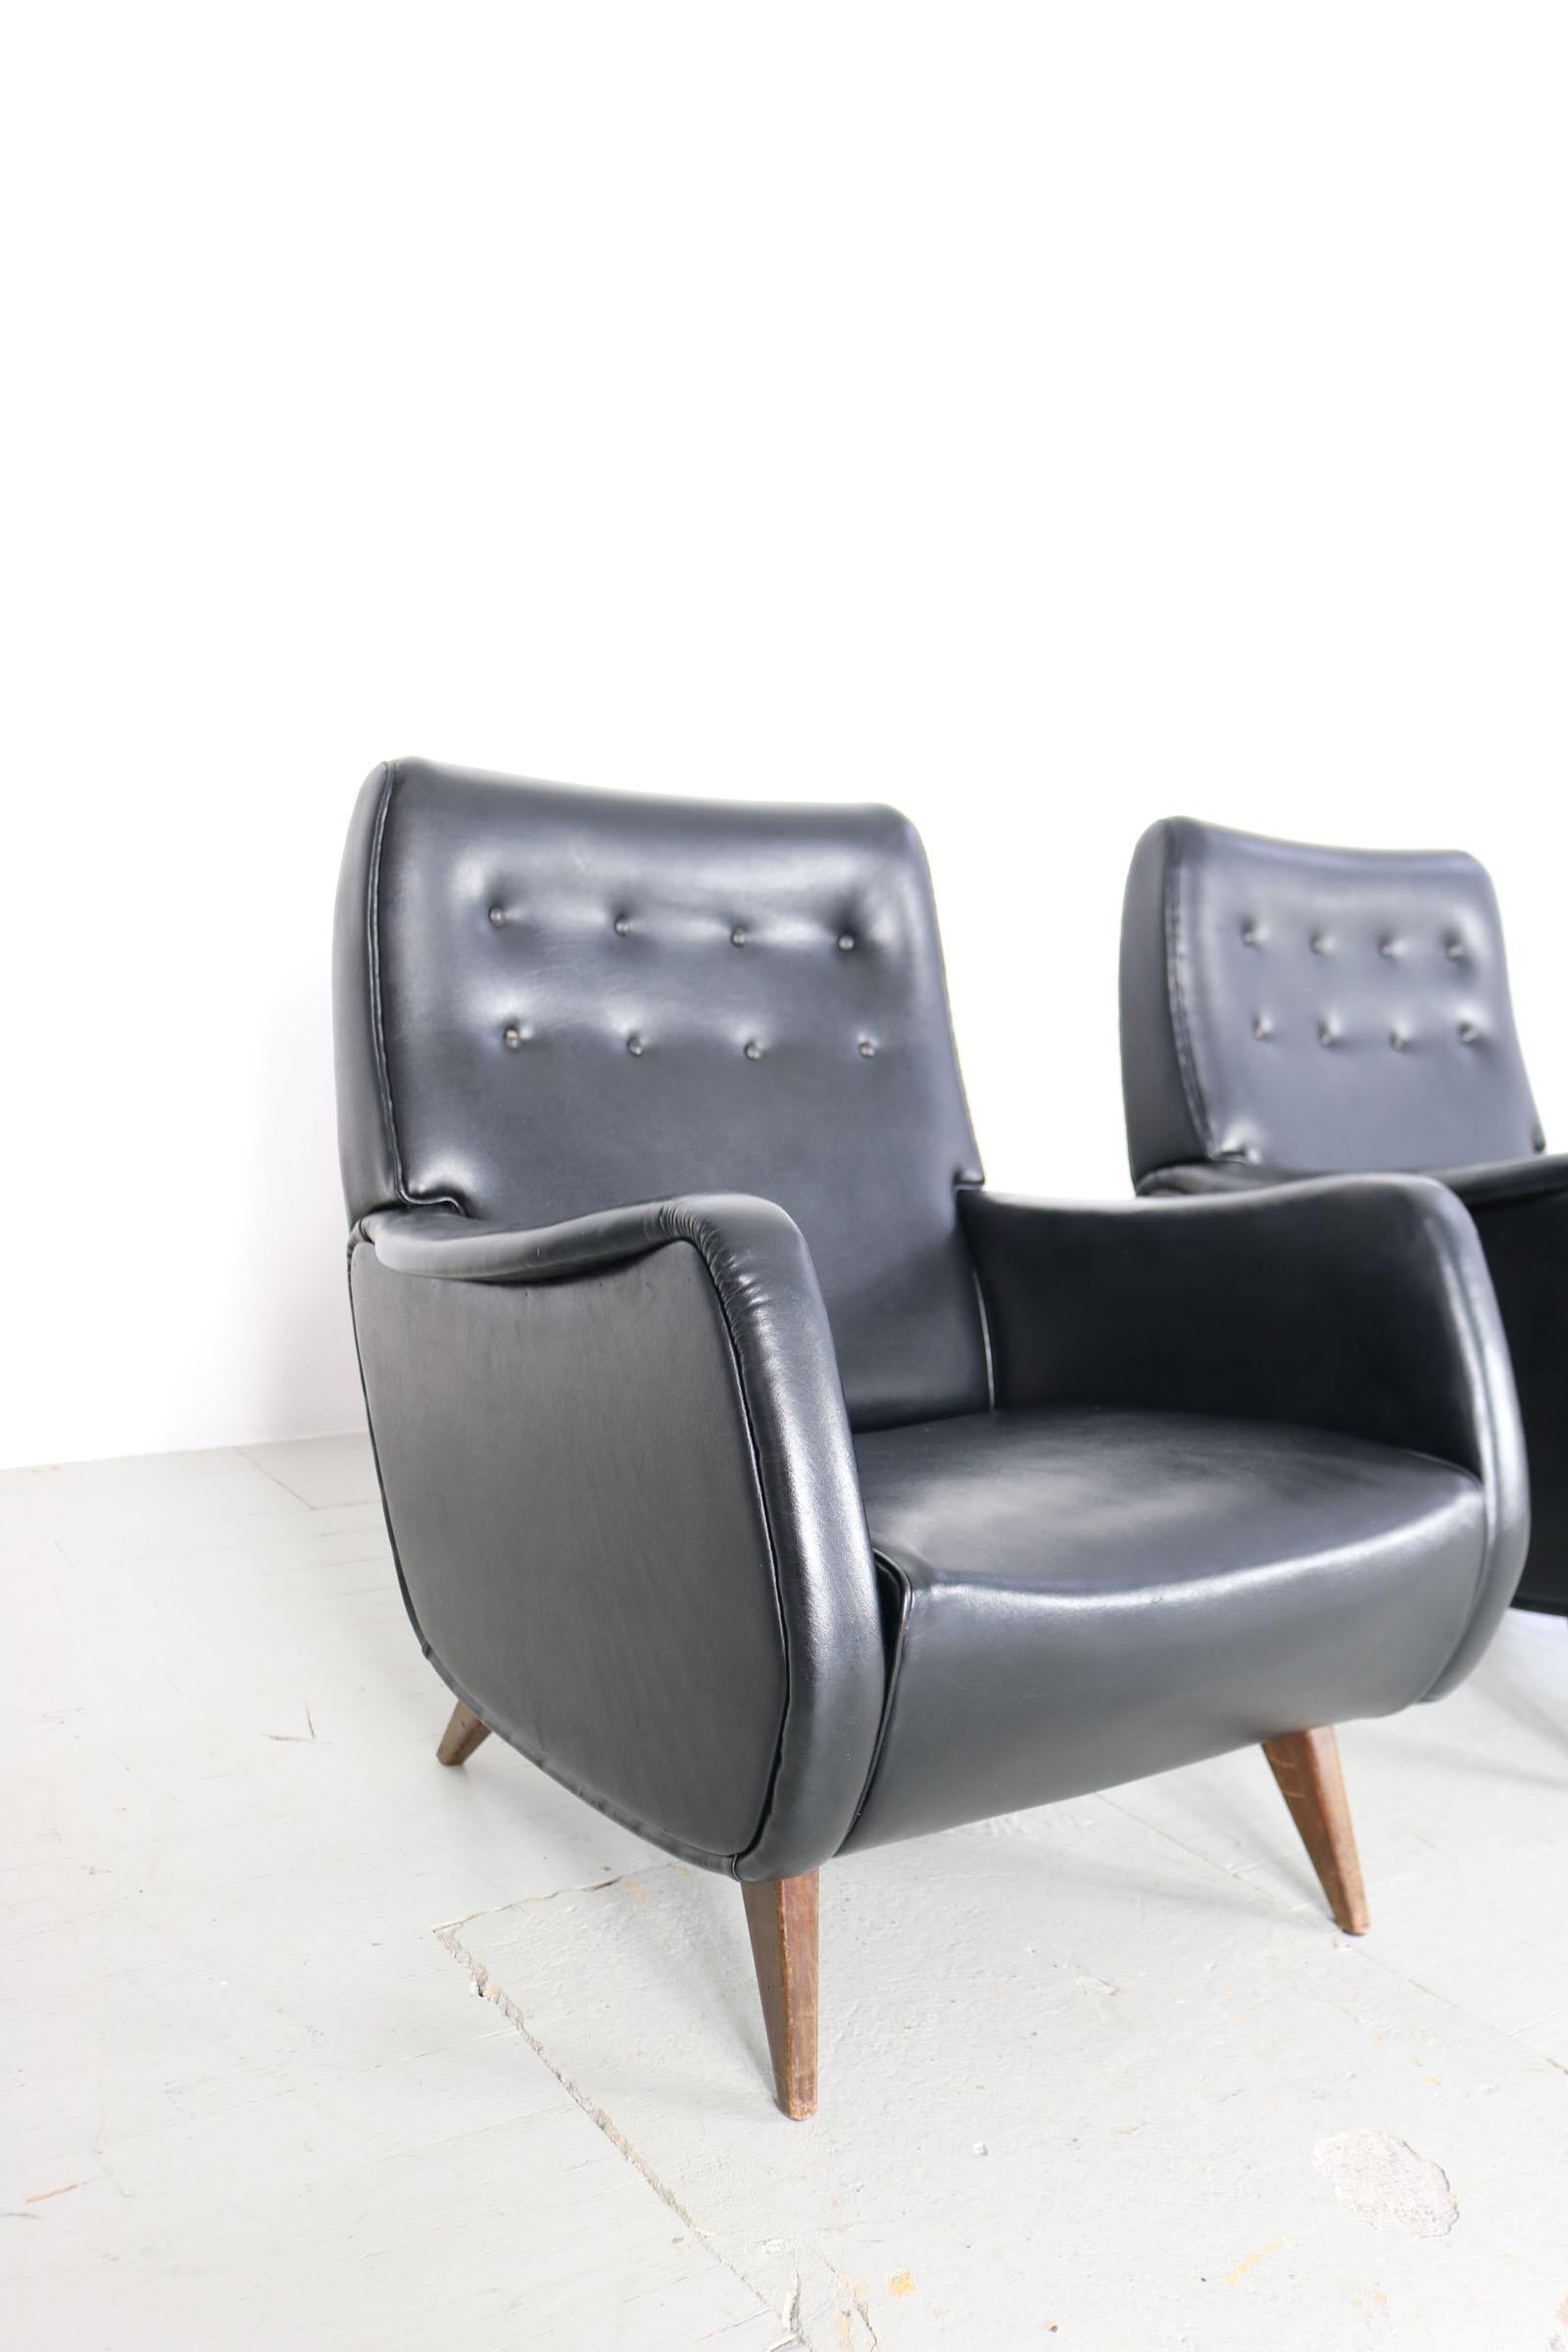 Set of Two Italian Armchairs in Original Black Leatherette Upholstery, 1950s For Sale 11